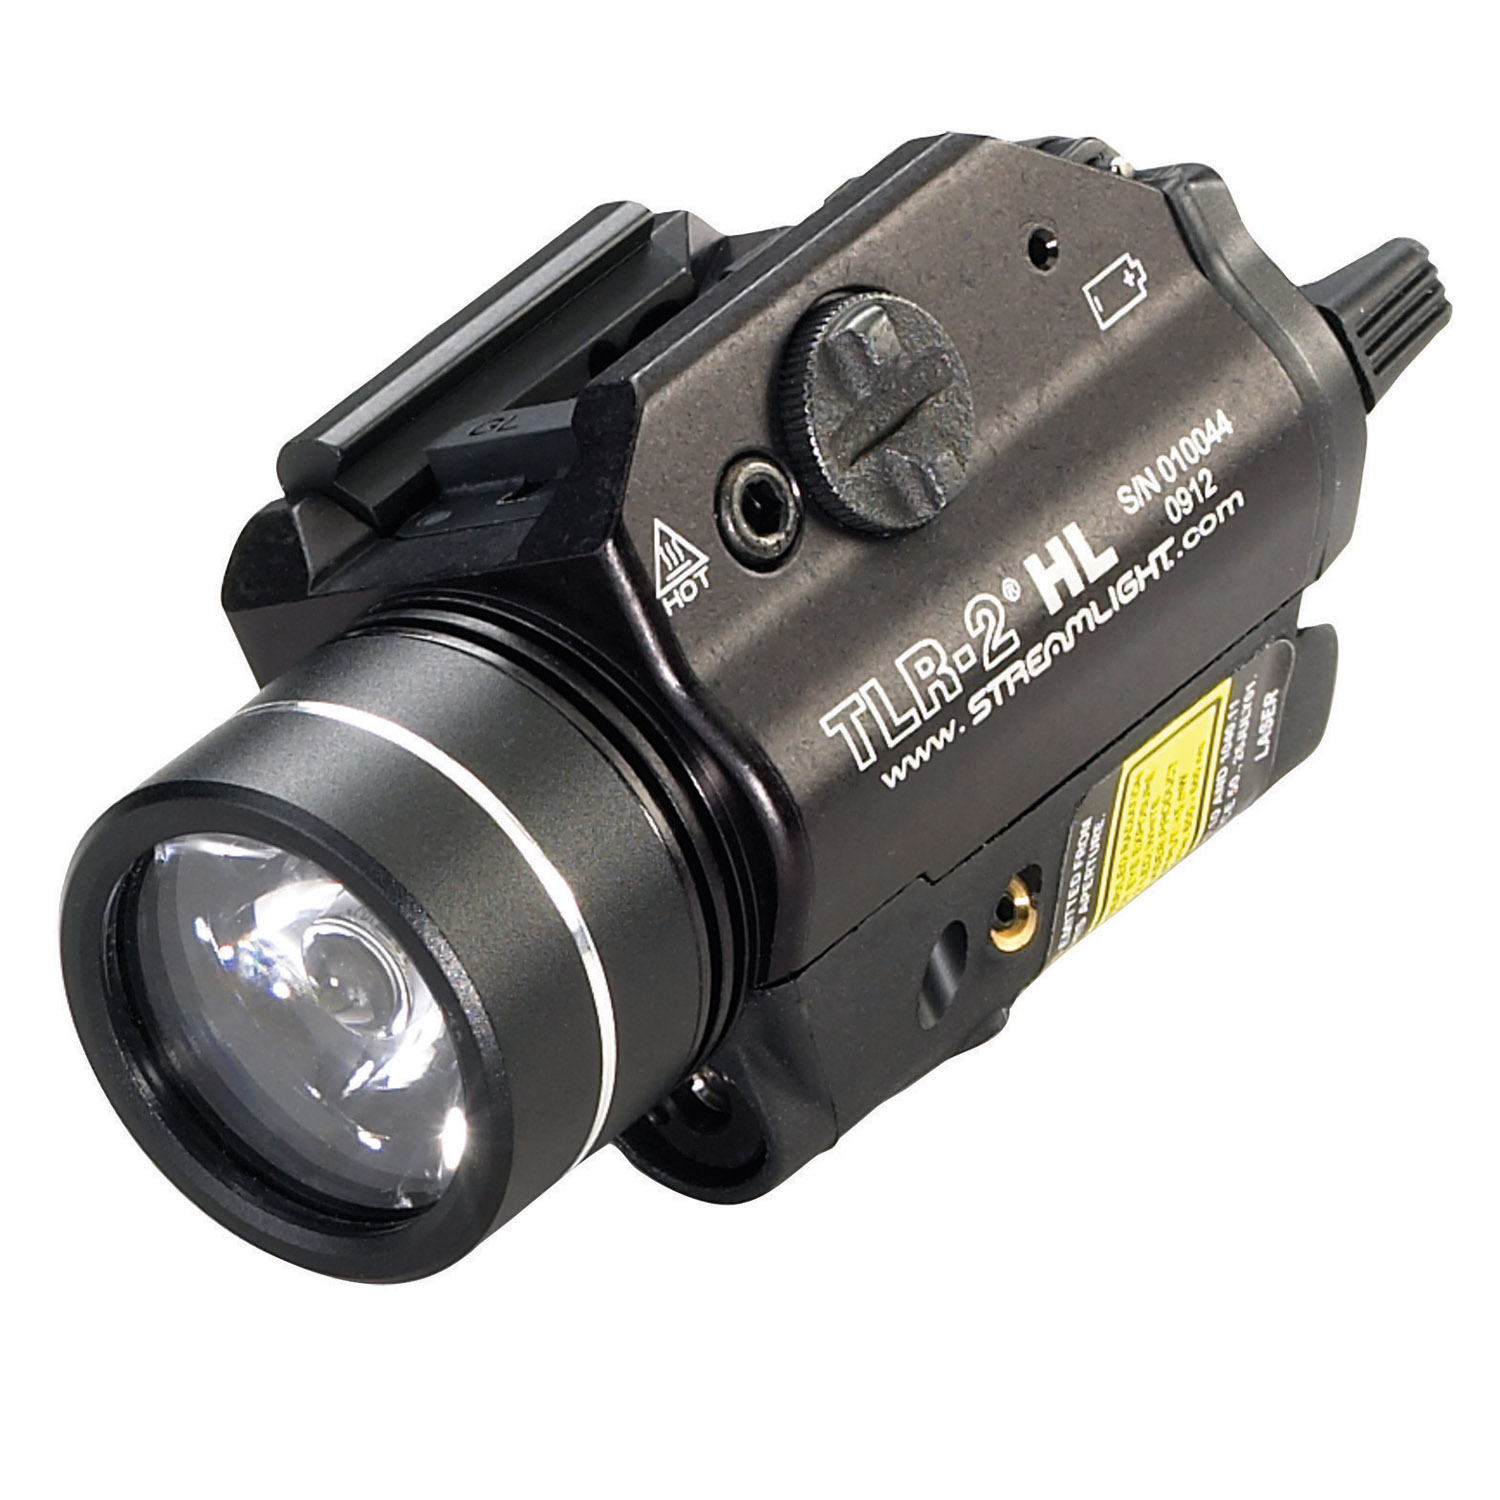 Streamlight TLR 2 HL Tactical Gun Mount Weapon Light with La